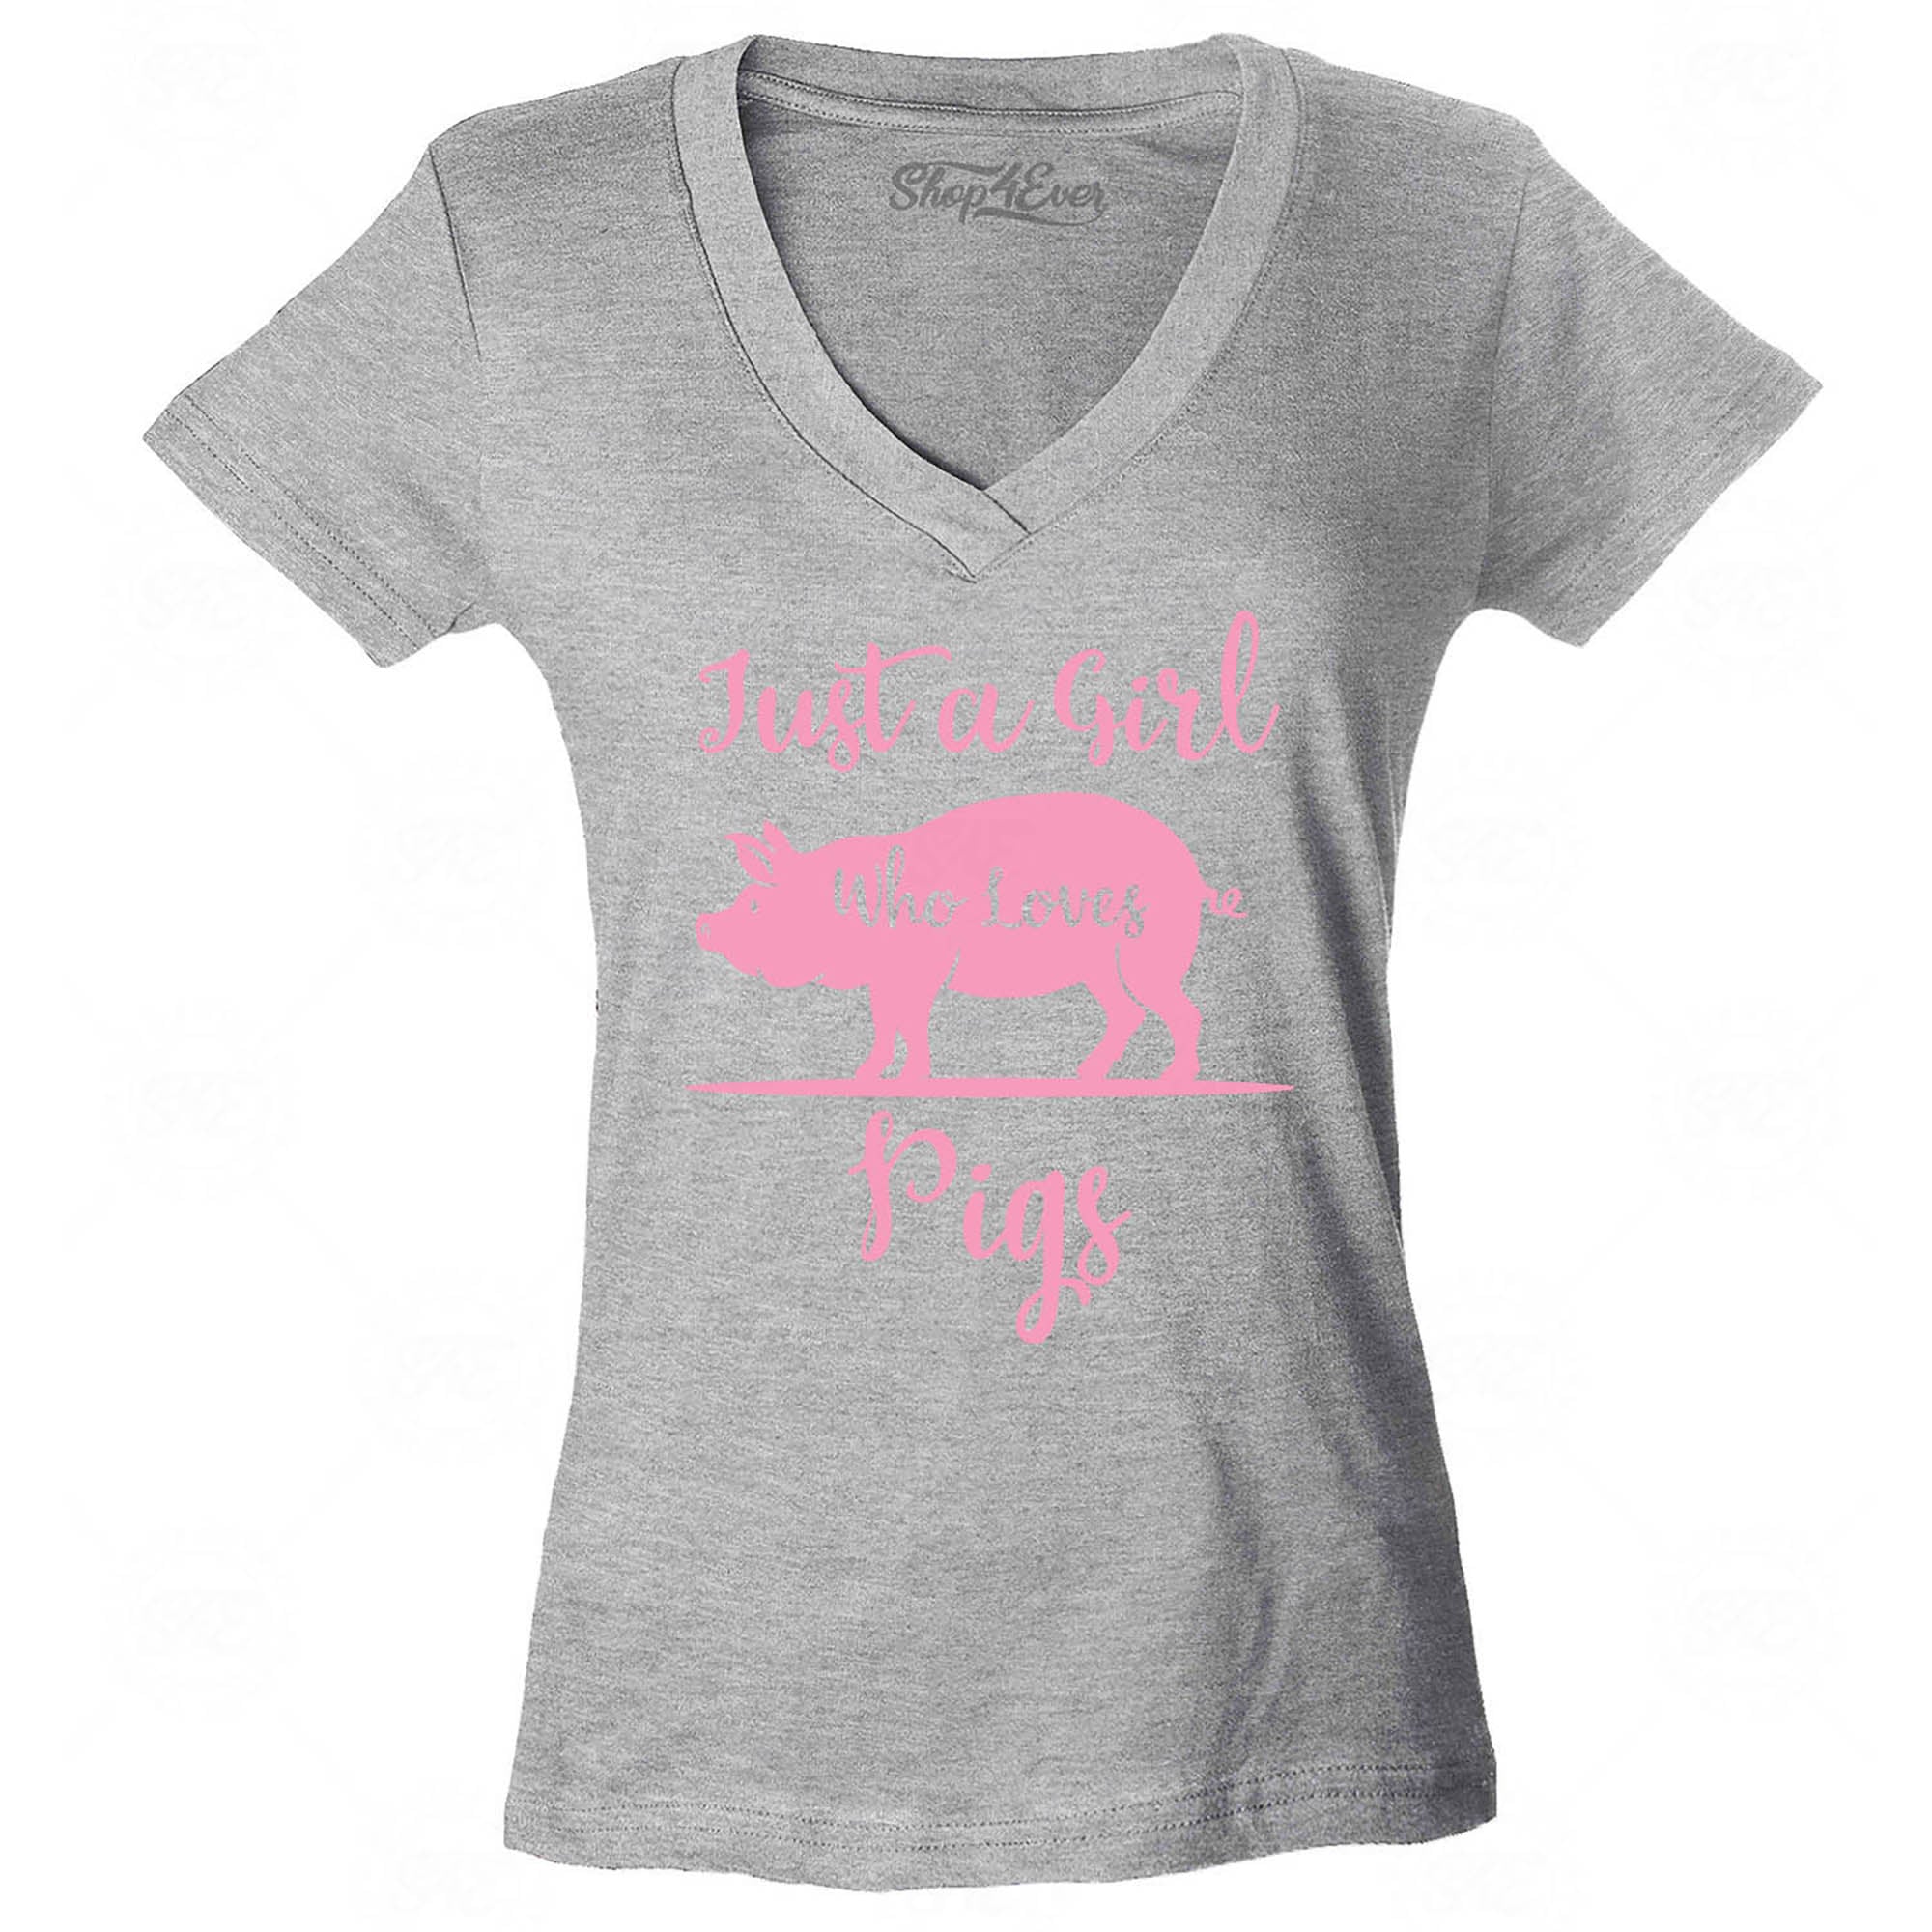 Just A Girl Who Loves Pigs Women's V-Neck T-Shirt Slim Fit